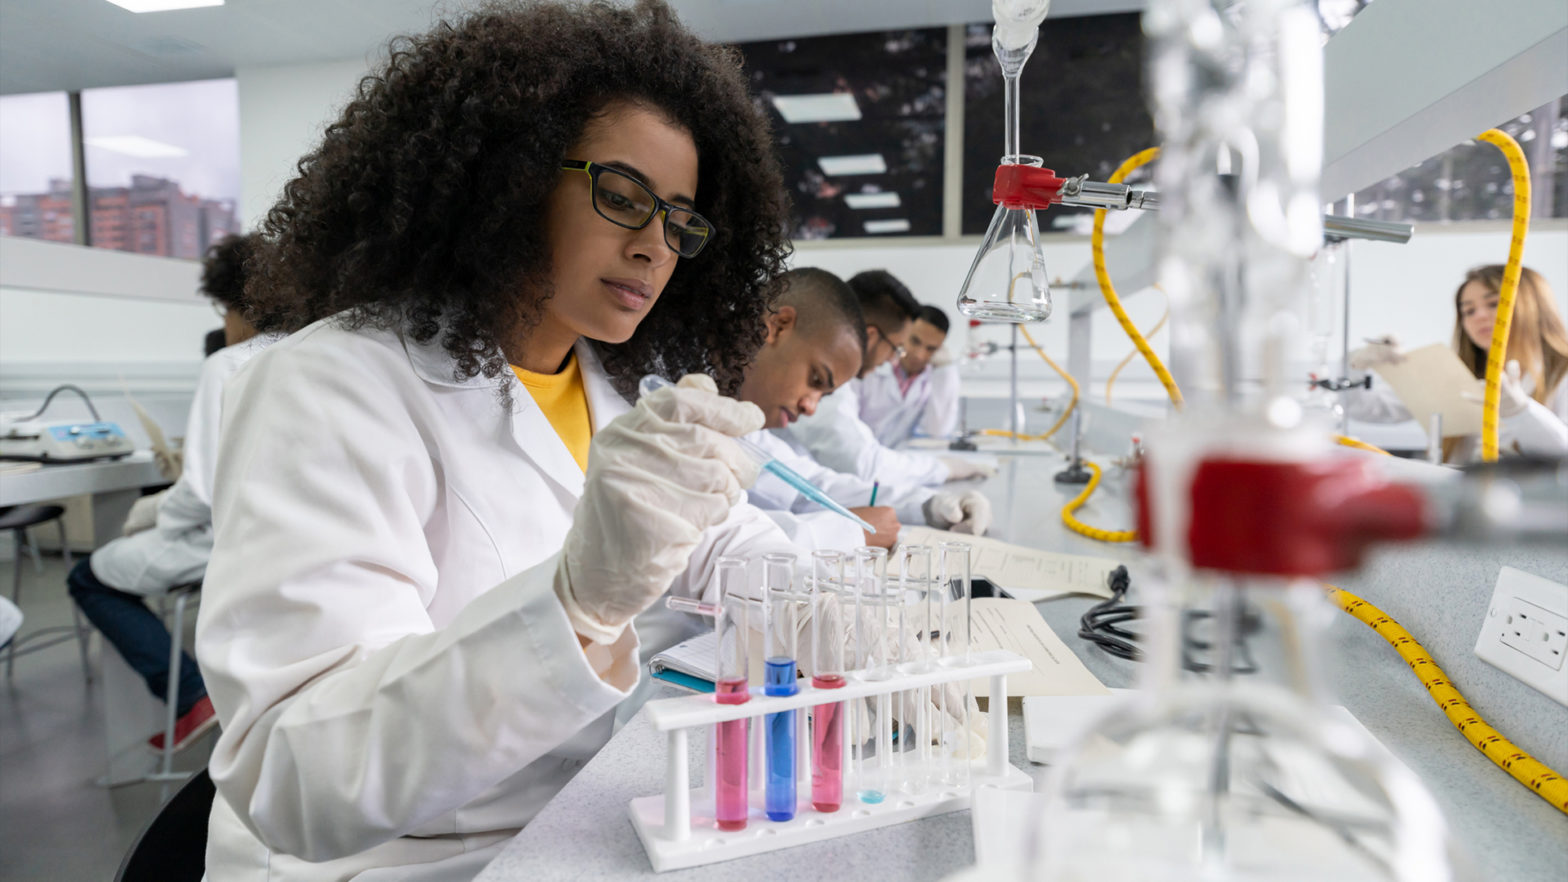 This Program Raised Over $17M To Fund HBCU Students Pursuing Careers in STEM